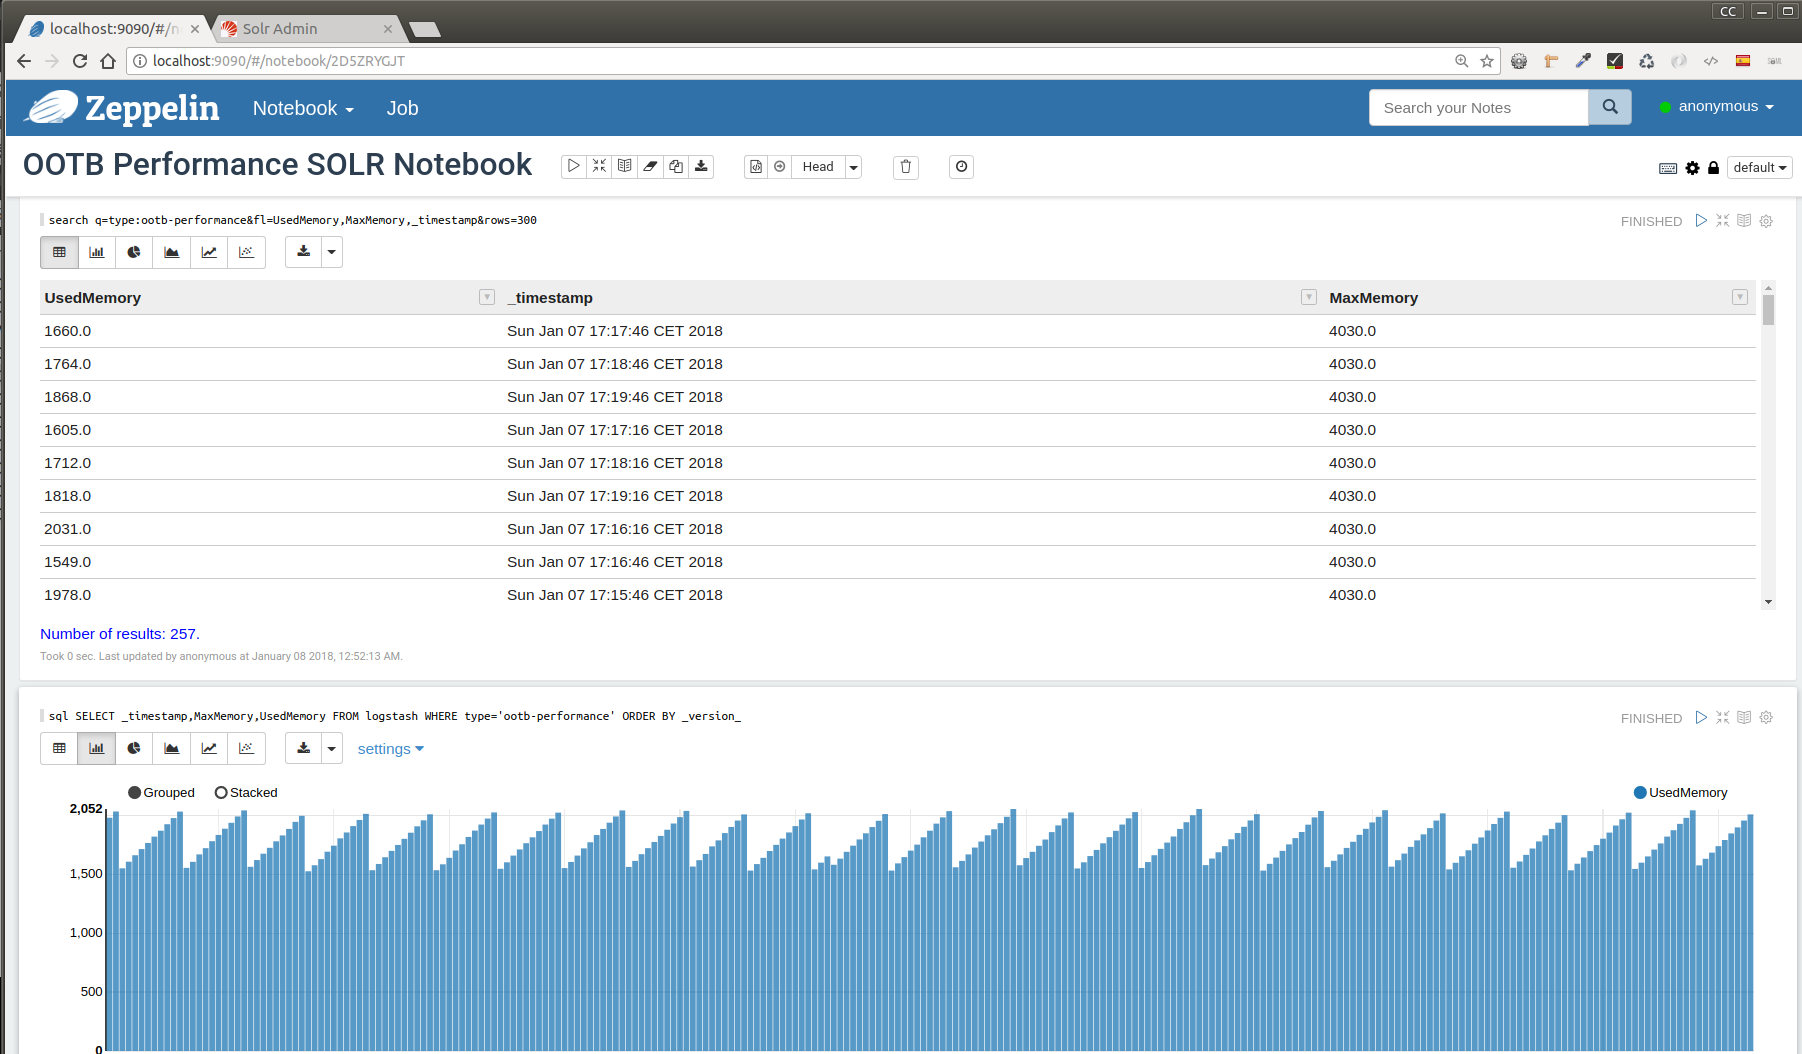 More on monitoring dashboards for Alfresco using SOLR, Banana and Apache Zeppelin